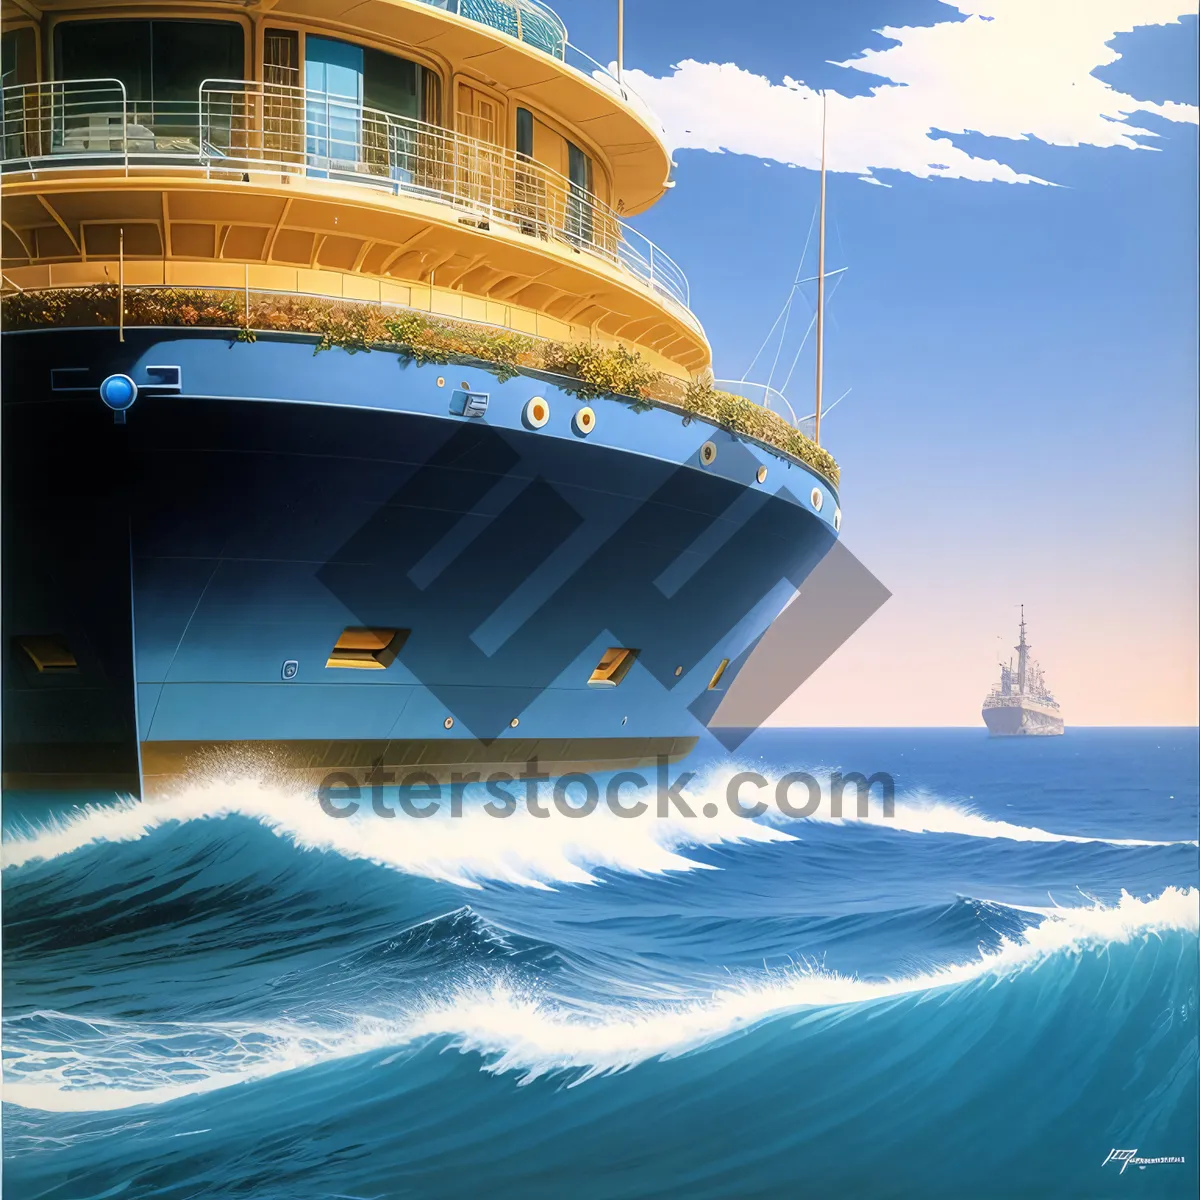 Picture of Seaside Voyage: A Liner Cruising on the Open Ocean